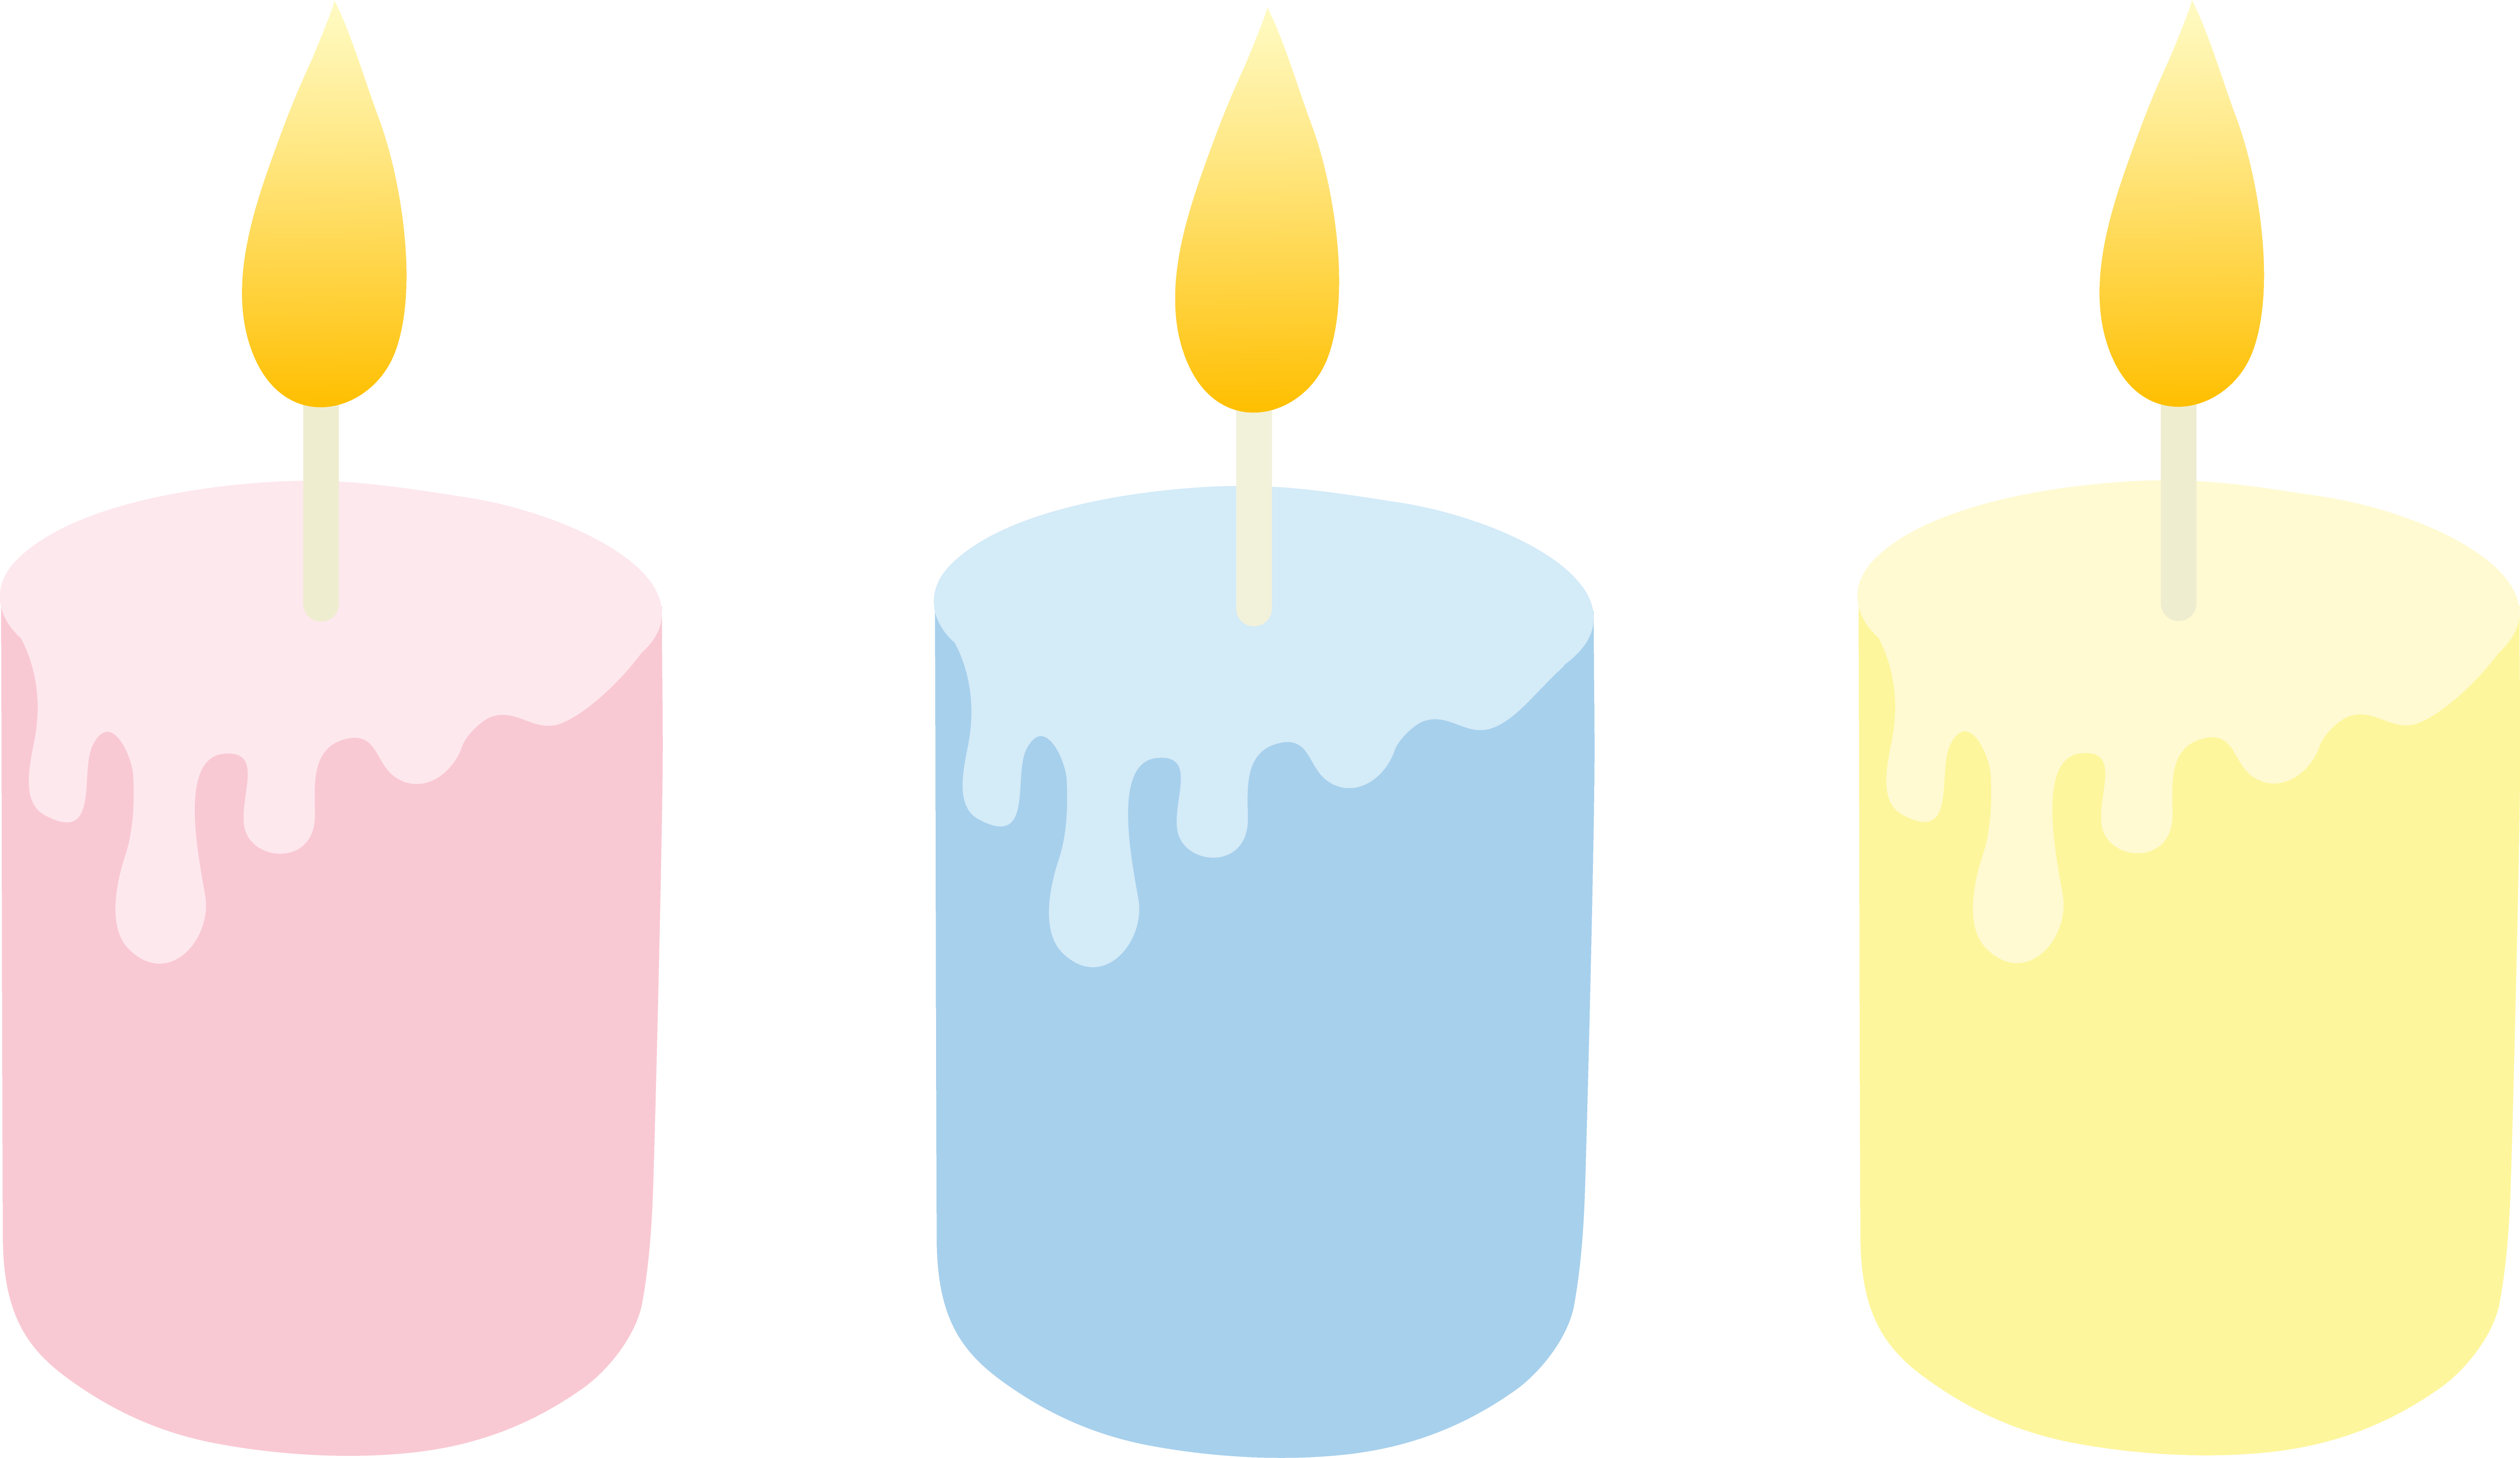 Three Pastel Colored Candles - Blue And Pink Candle (5885x3405)